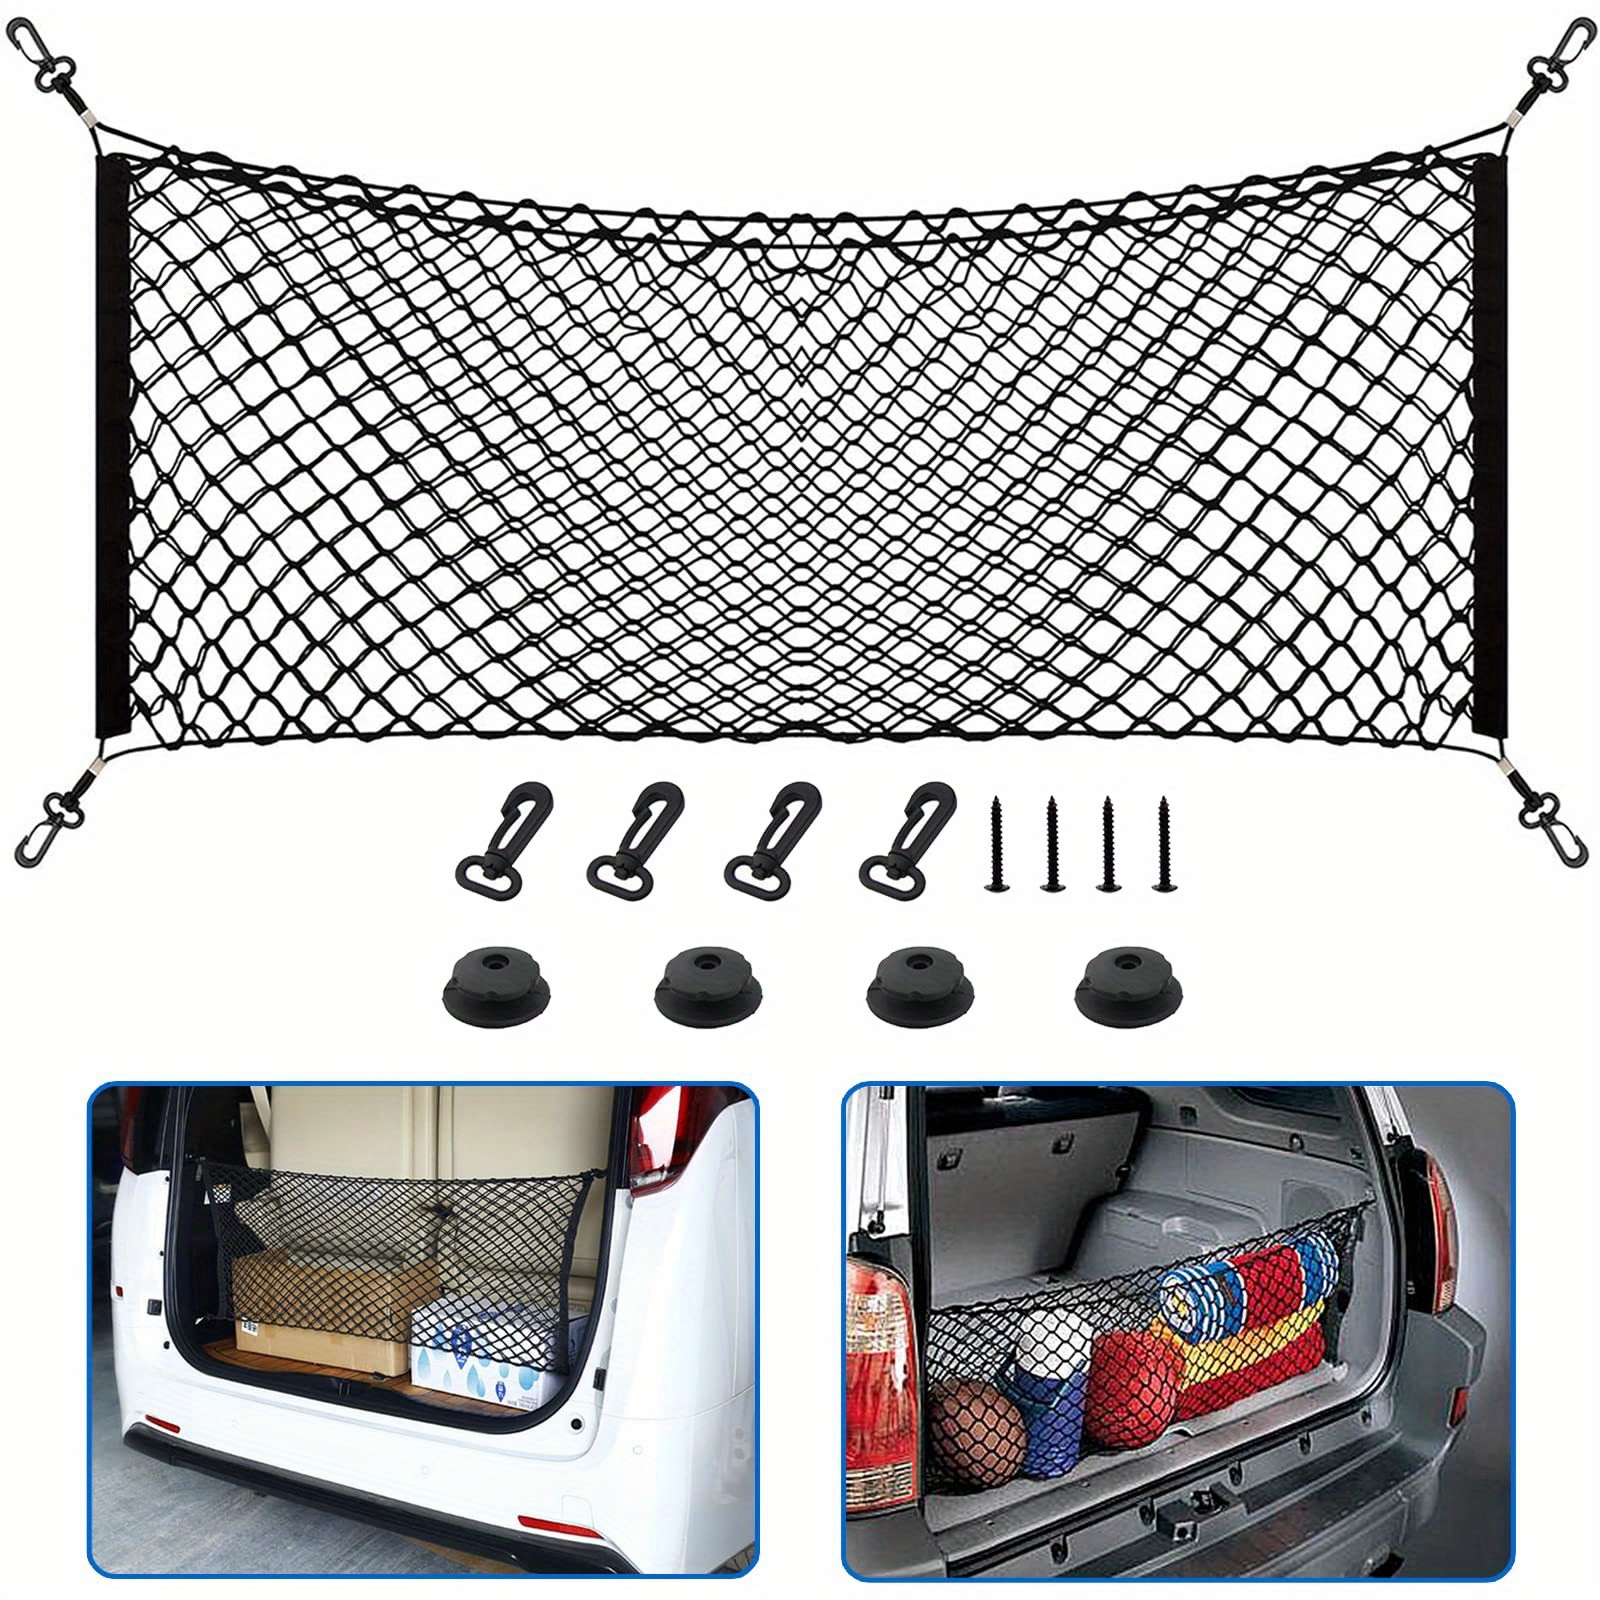 1pc Heavy Duty Cargo Nets For SUV Stretchable, Universal Trunk Net  Organizer For Cars, Trucks Adjustable Storage Cargo Net With Hooks